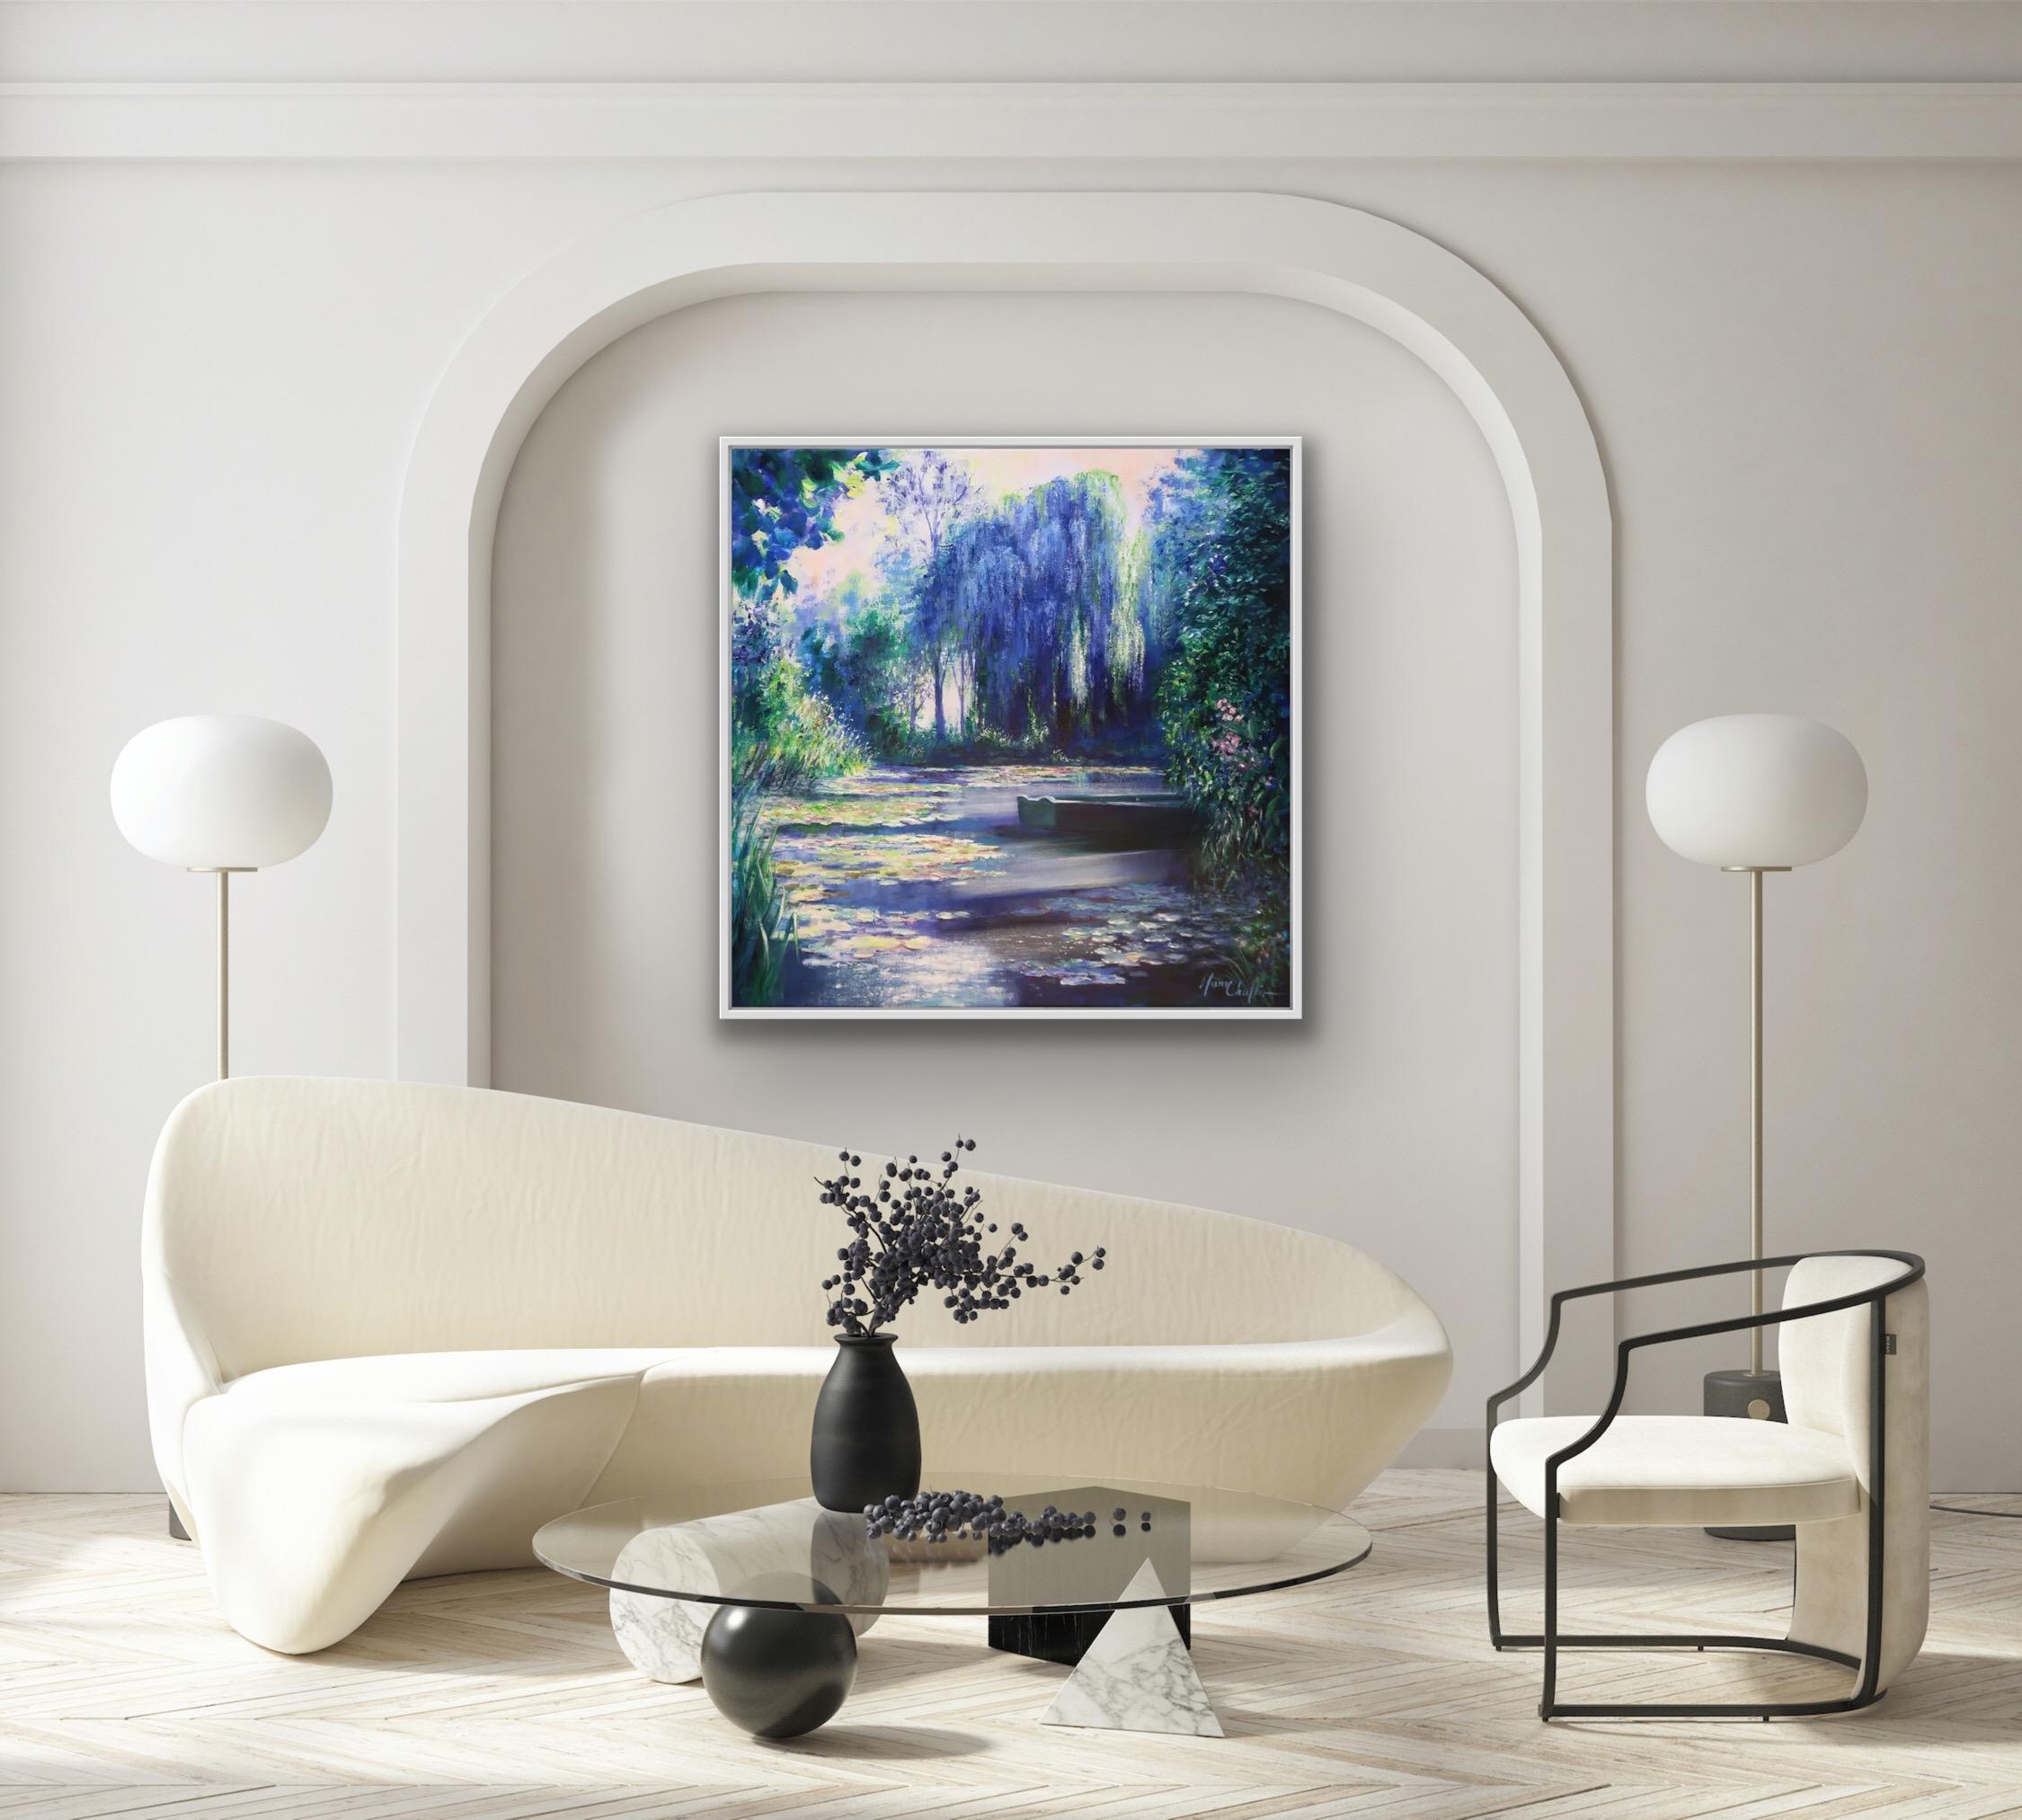 Harmony in blue at Giverny (Water Gardens at Claude Monet’s house), Original art - Painting by Mary Chaplin